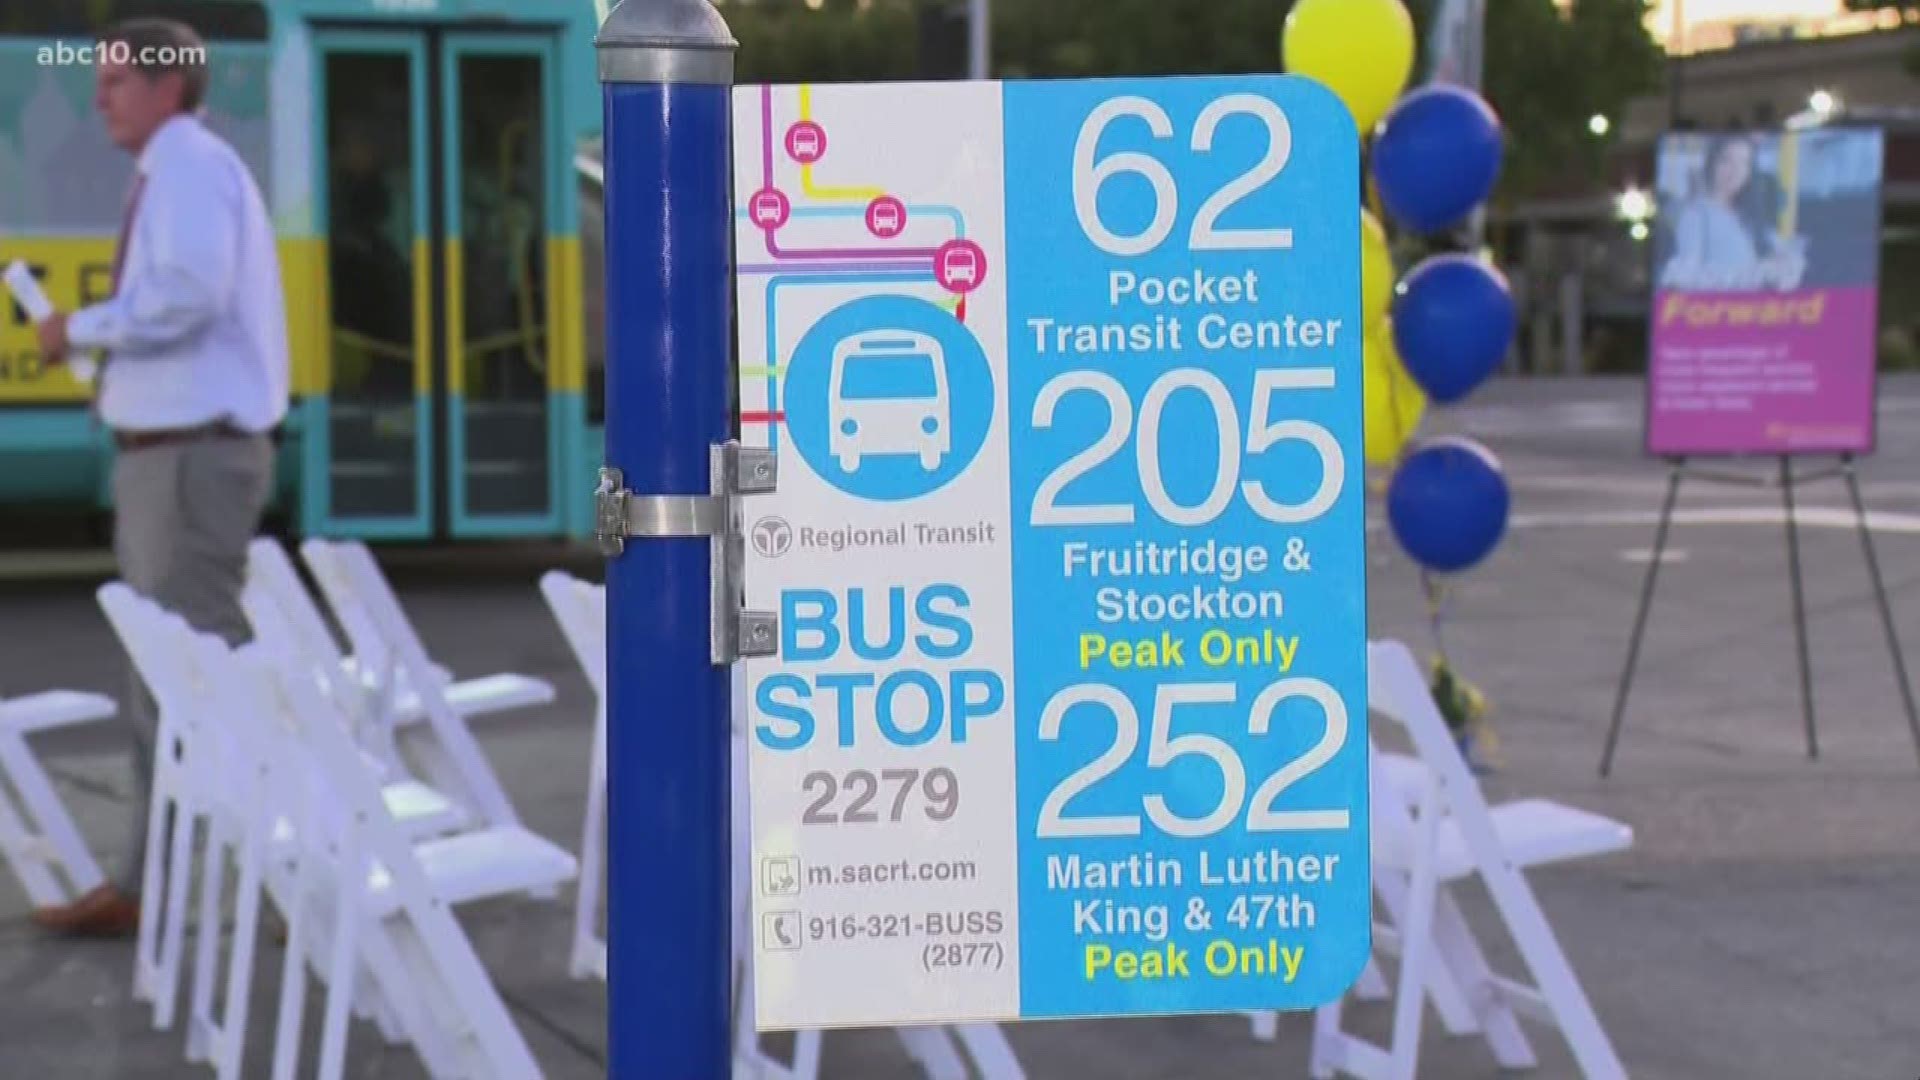 If you ride the Sacramento Regional Transit buses today, there are some big changes you’ll want to know about. The transit district launched a new bus network on Sunday, but today is the first time commuters will be using the service.